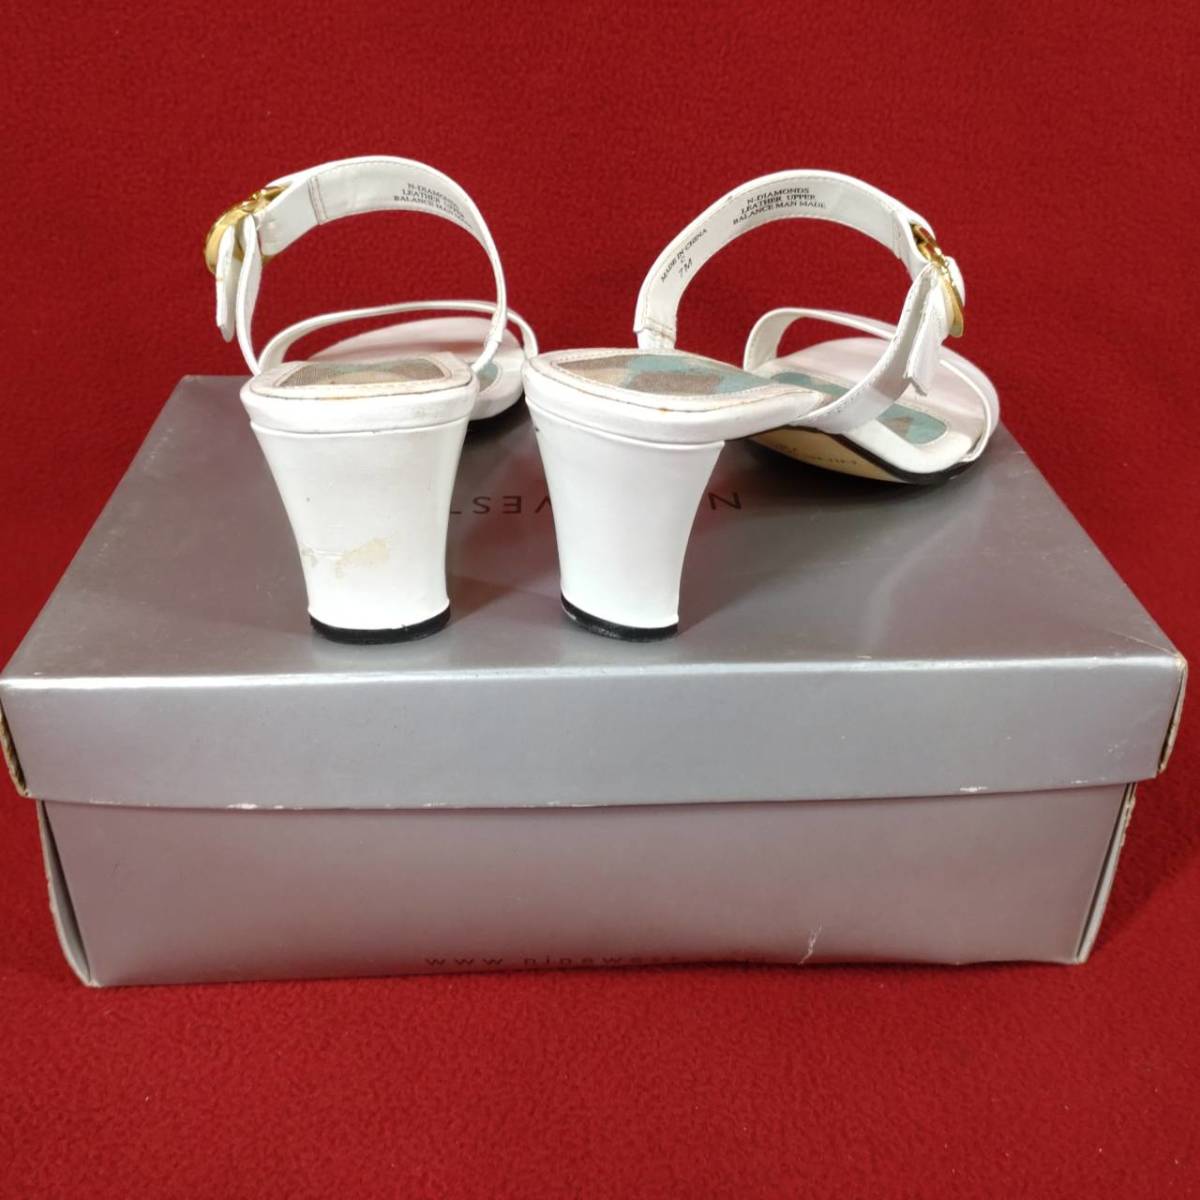 ③ Nine West NINE WEST mules 7M Japan size 24cm white sandals lady's fashion casual na in waste to